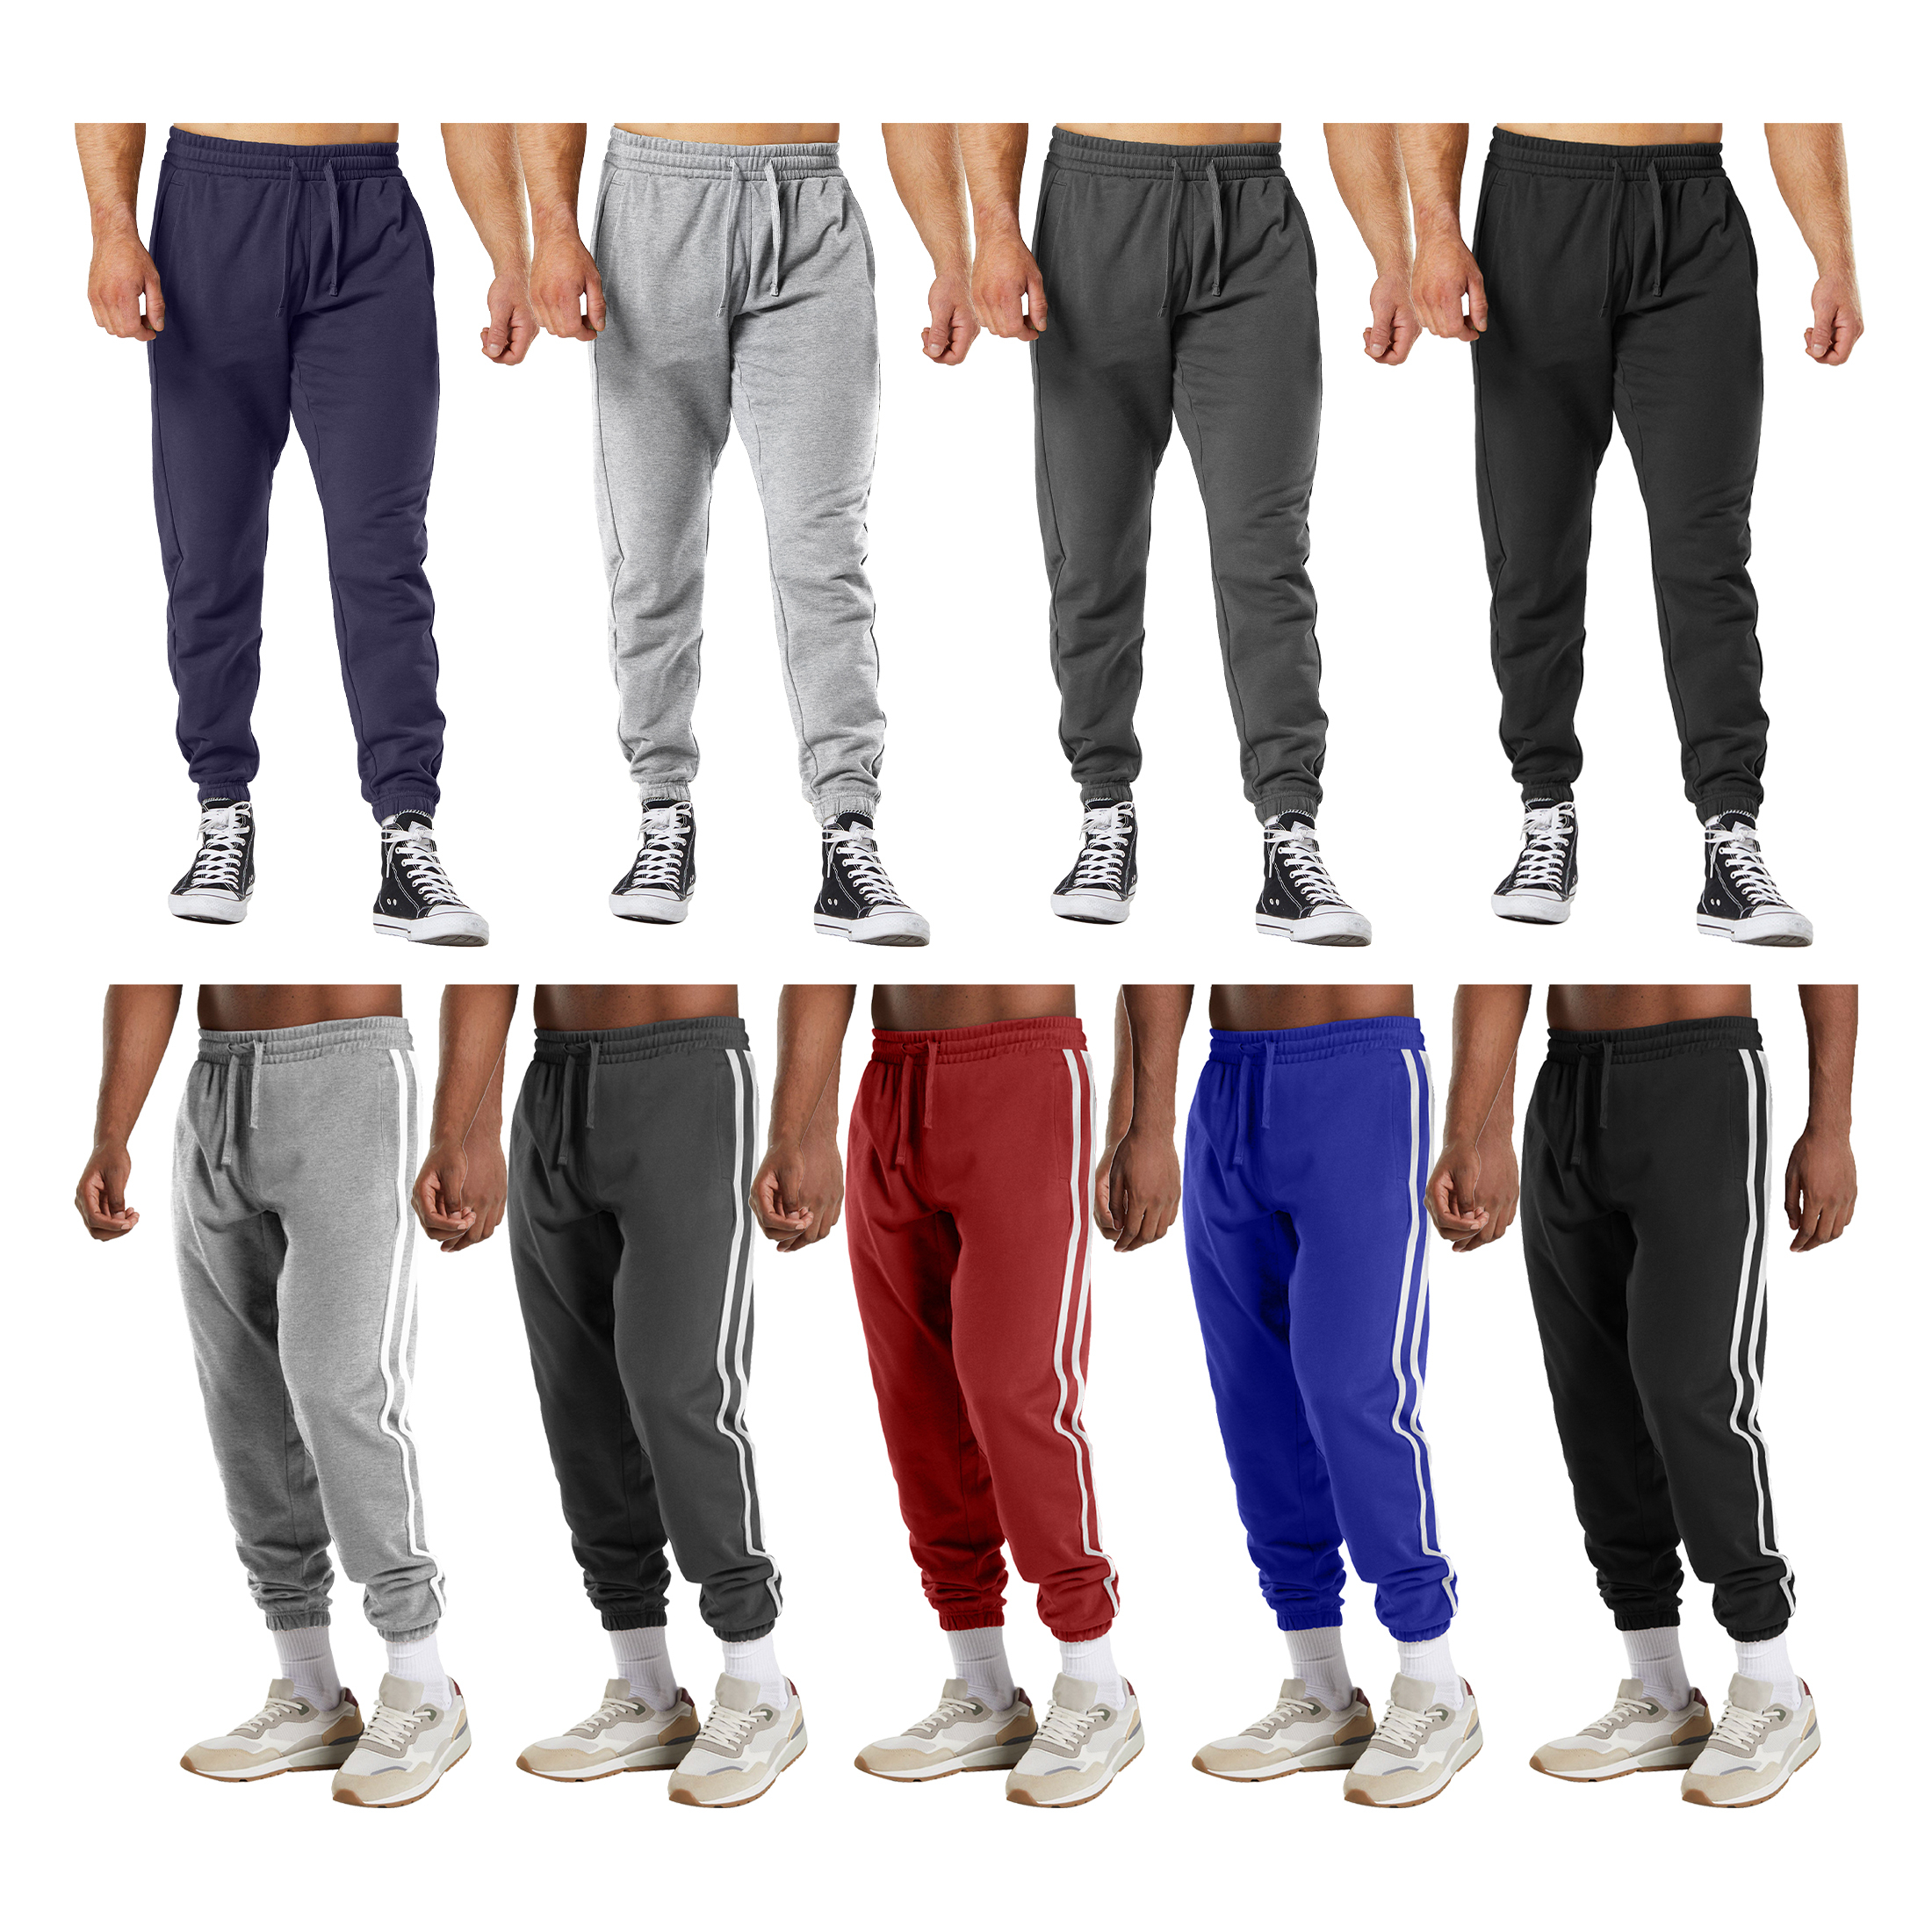 Multi-Pack: Men's Casual Fleece-Lined Elastic Bottom Jogger Pants With Pockets - 1-PACK, XXL